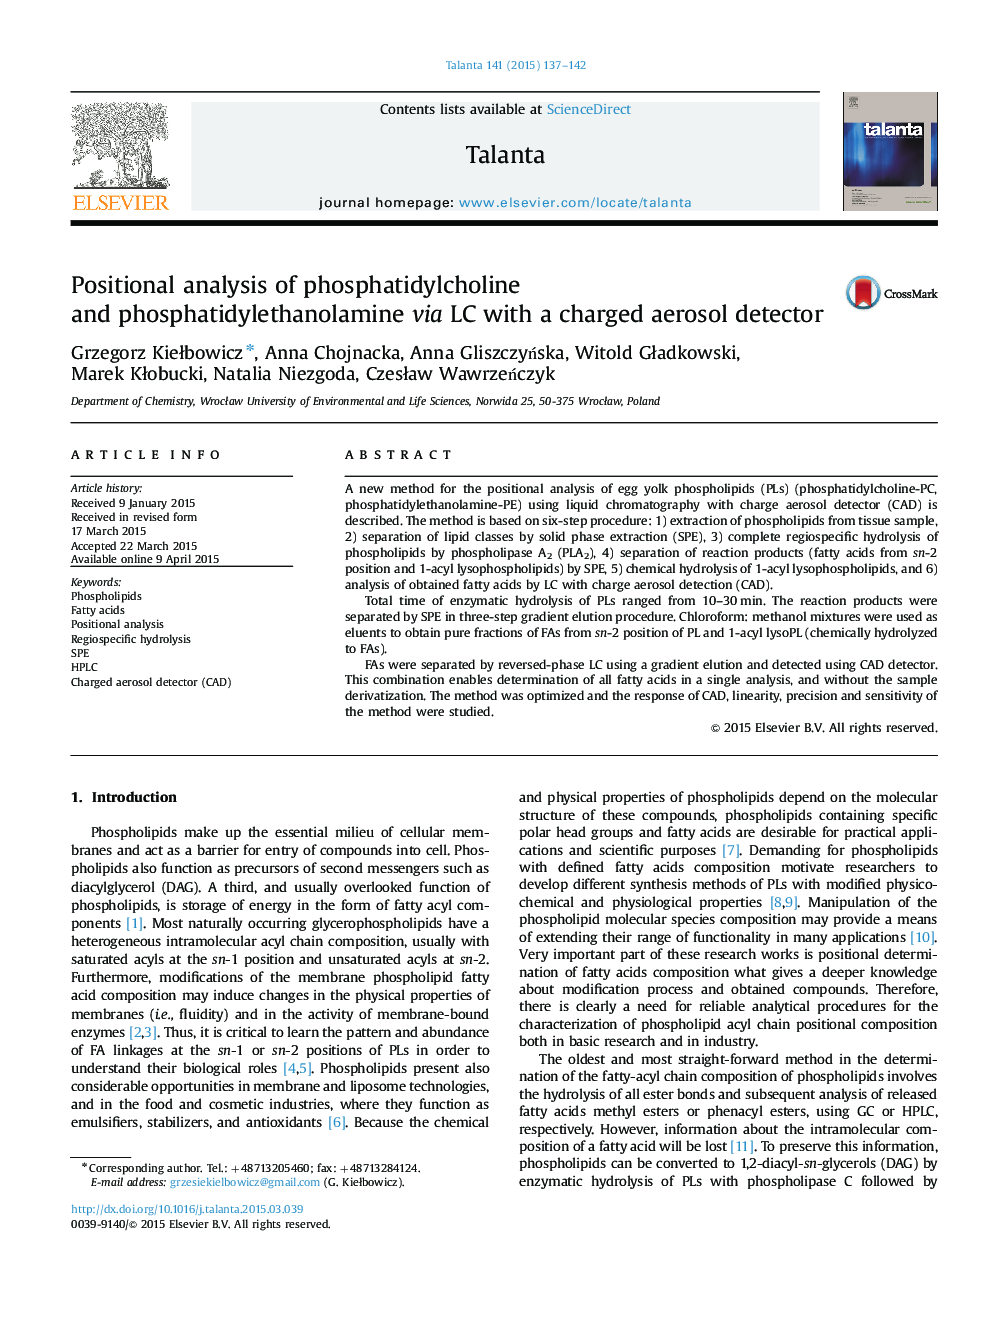 Positional analysis of phosphatidylcholine and phosphatidylethanolamine via LC with a charged aerosol detector